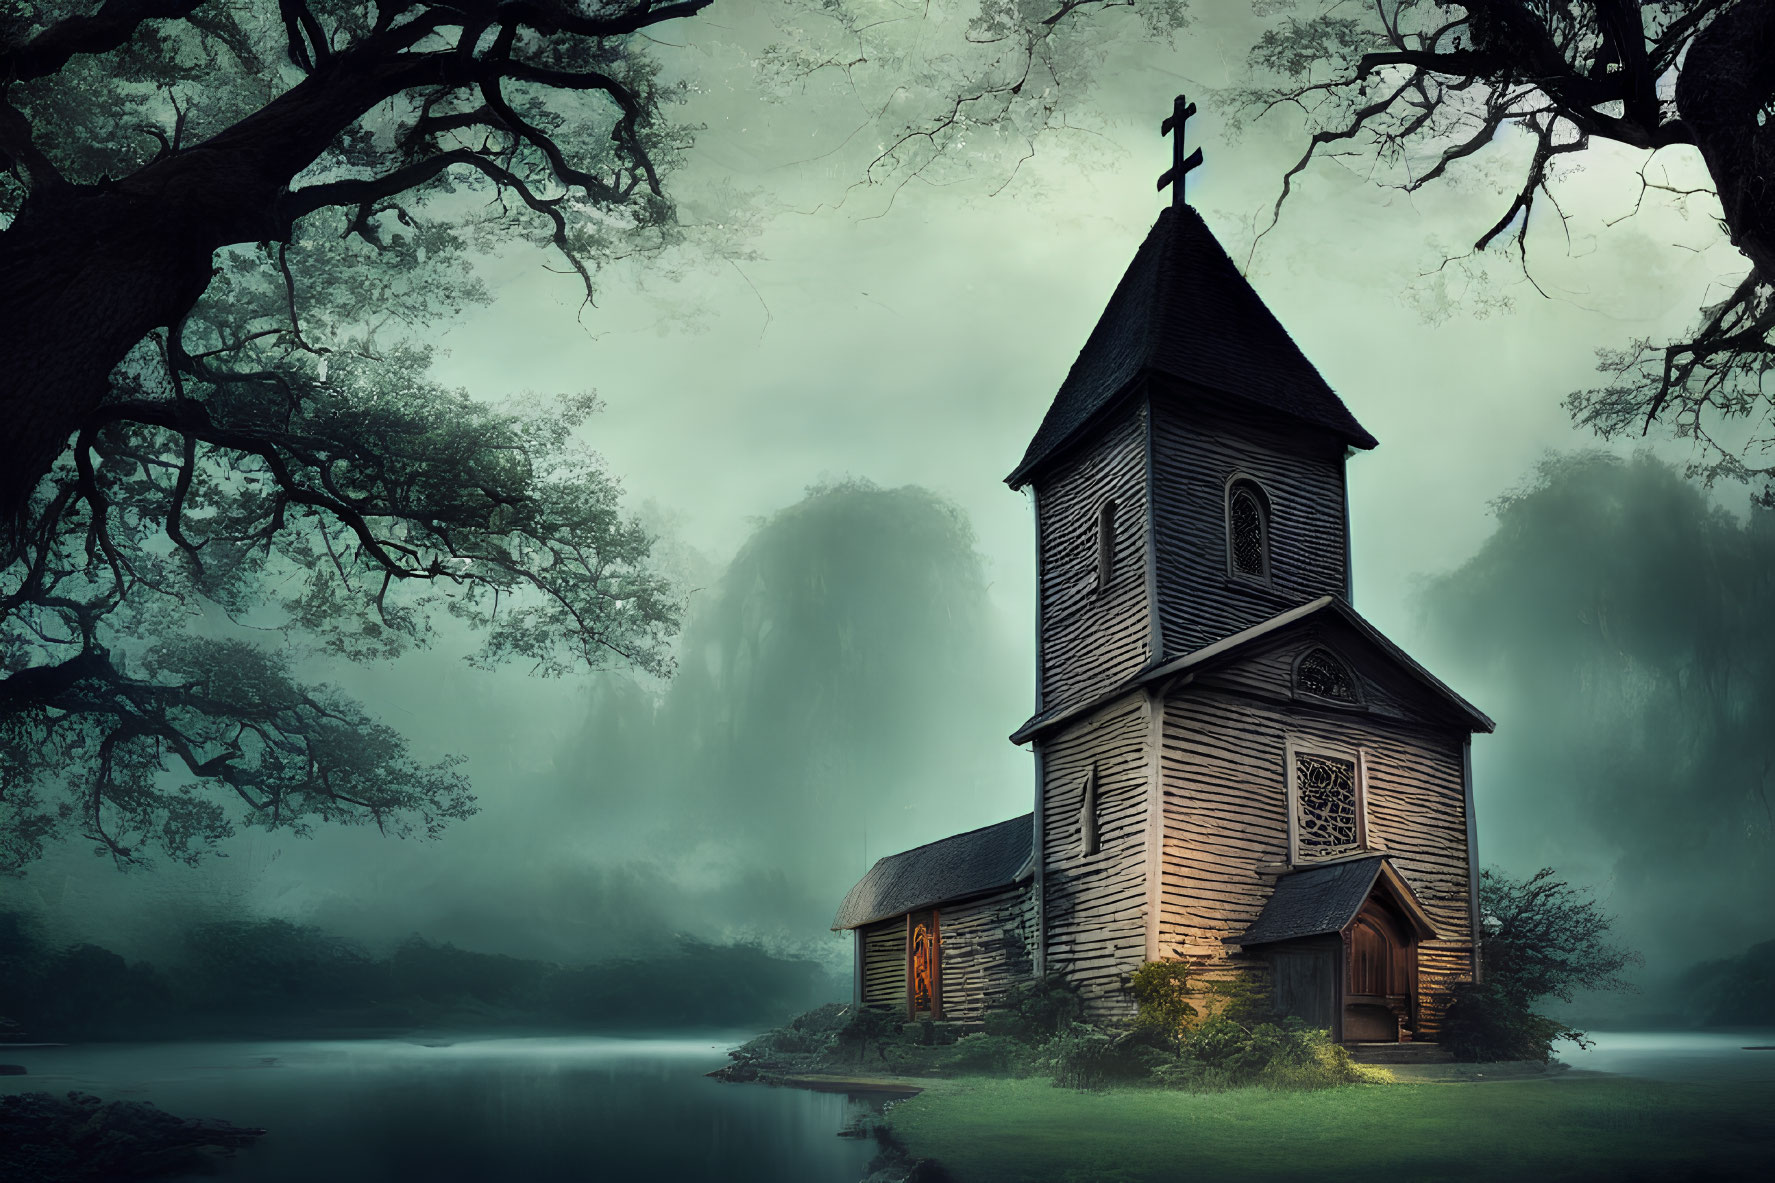 Misty lake twilight scene with old wooden church and eerie trees